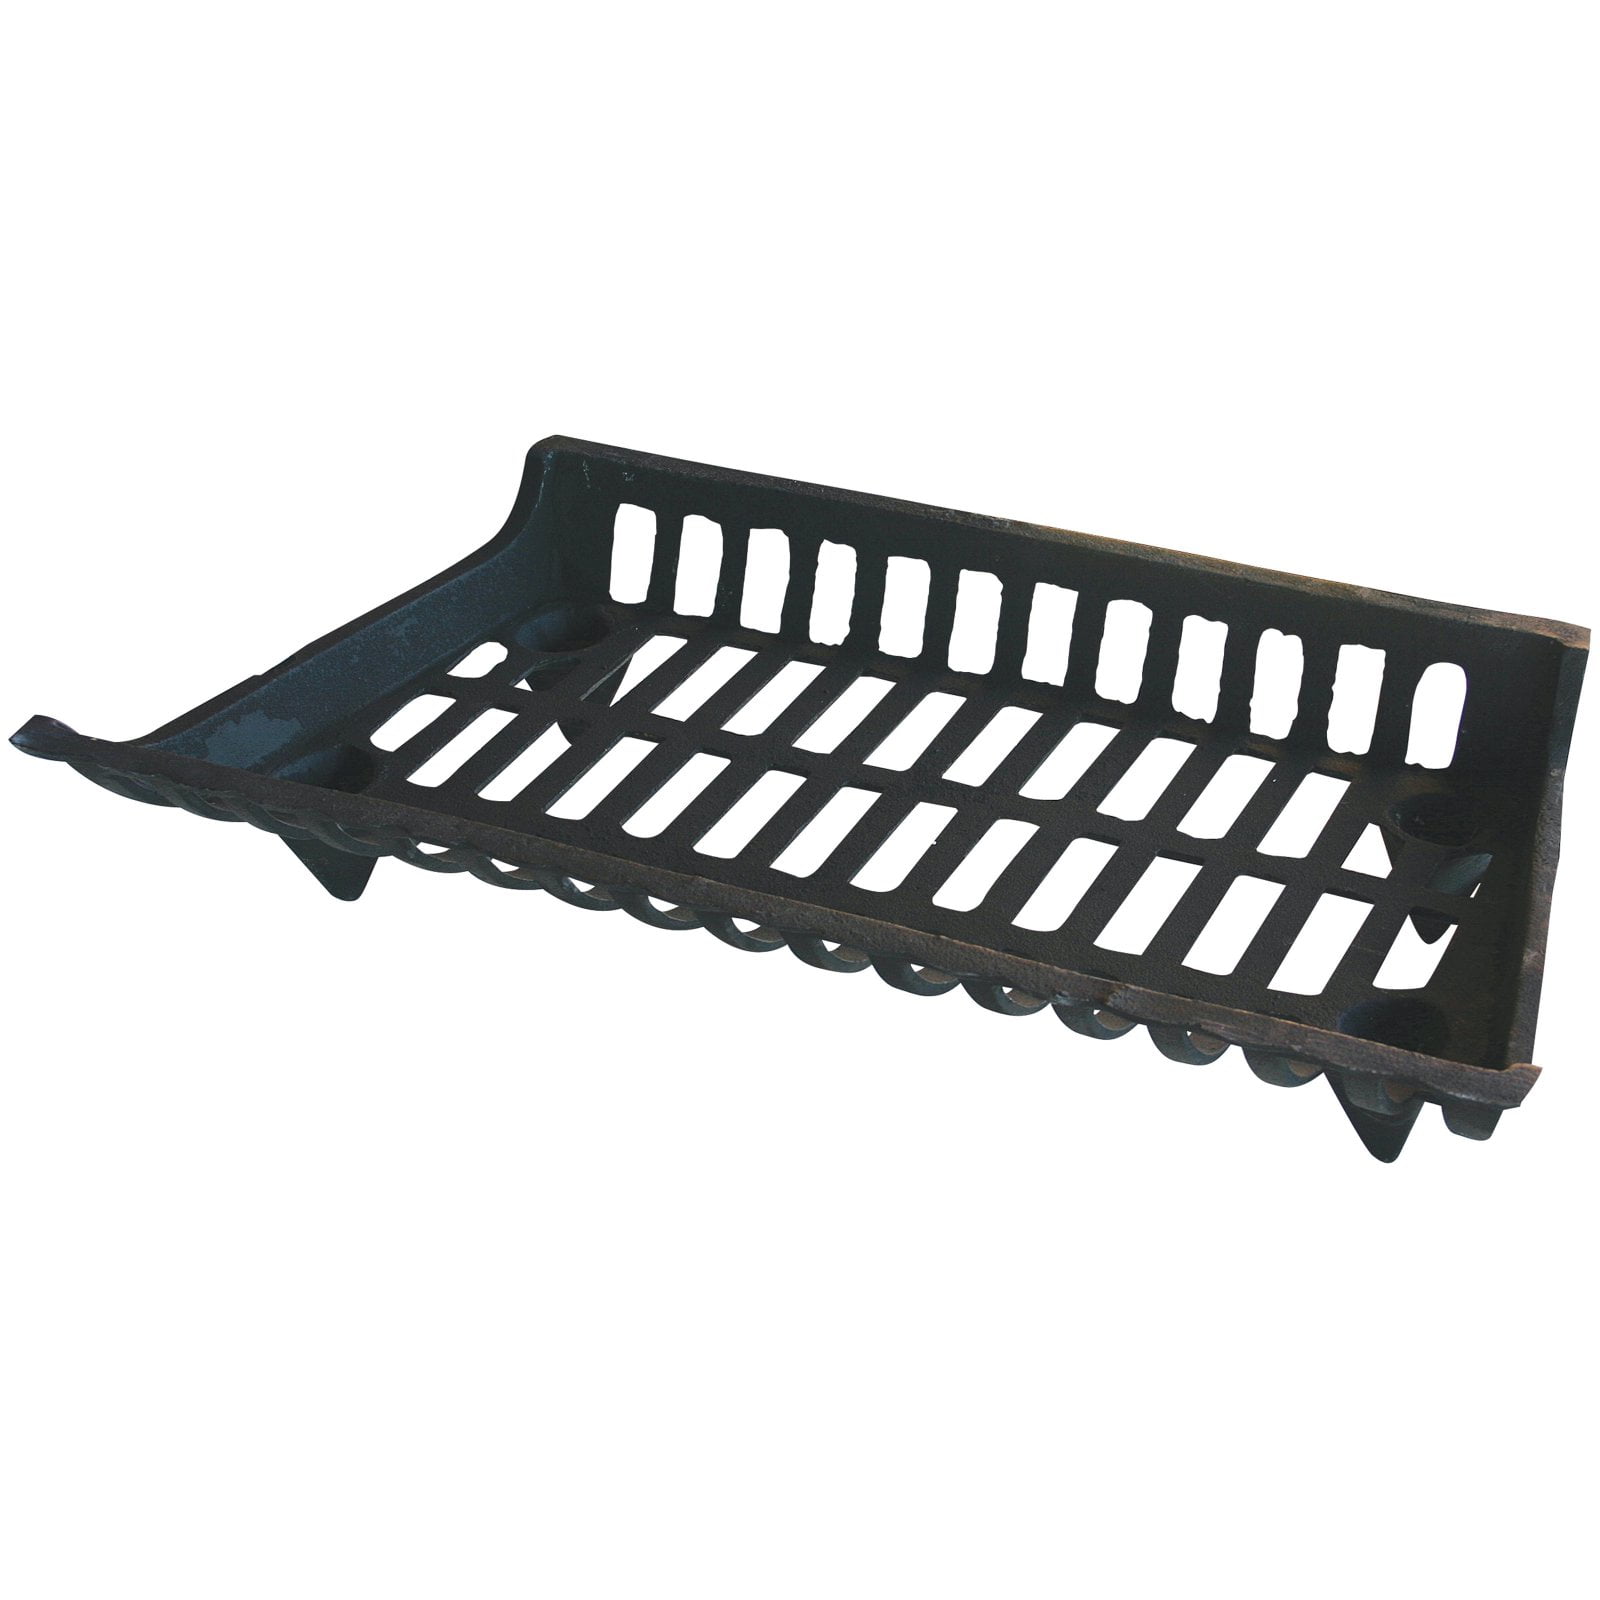 Uniflame 27 Inch Cast Iron Fireplace, Cleaning Cast Iron Fireplace Grate